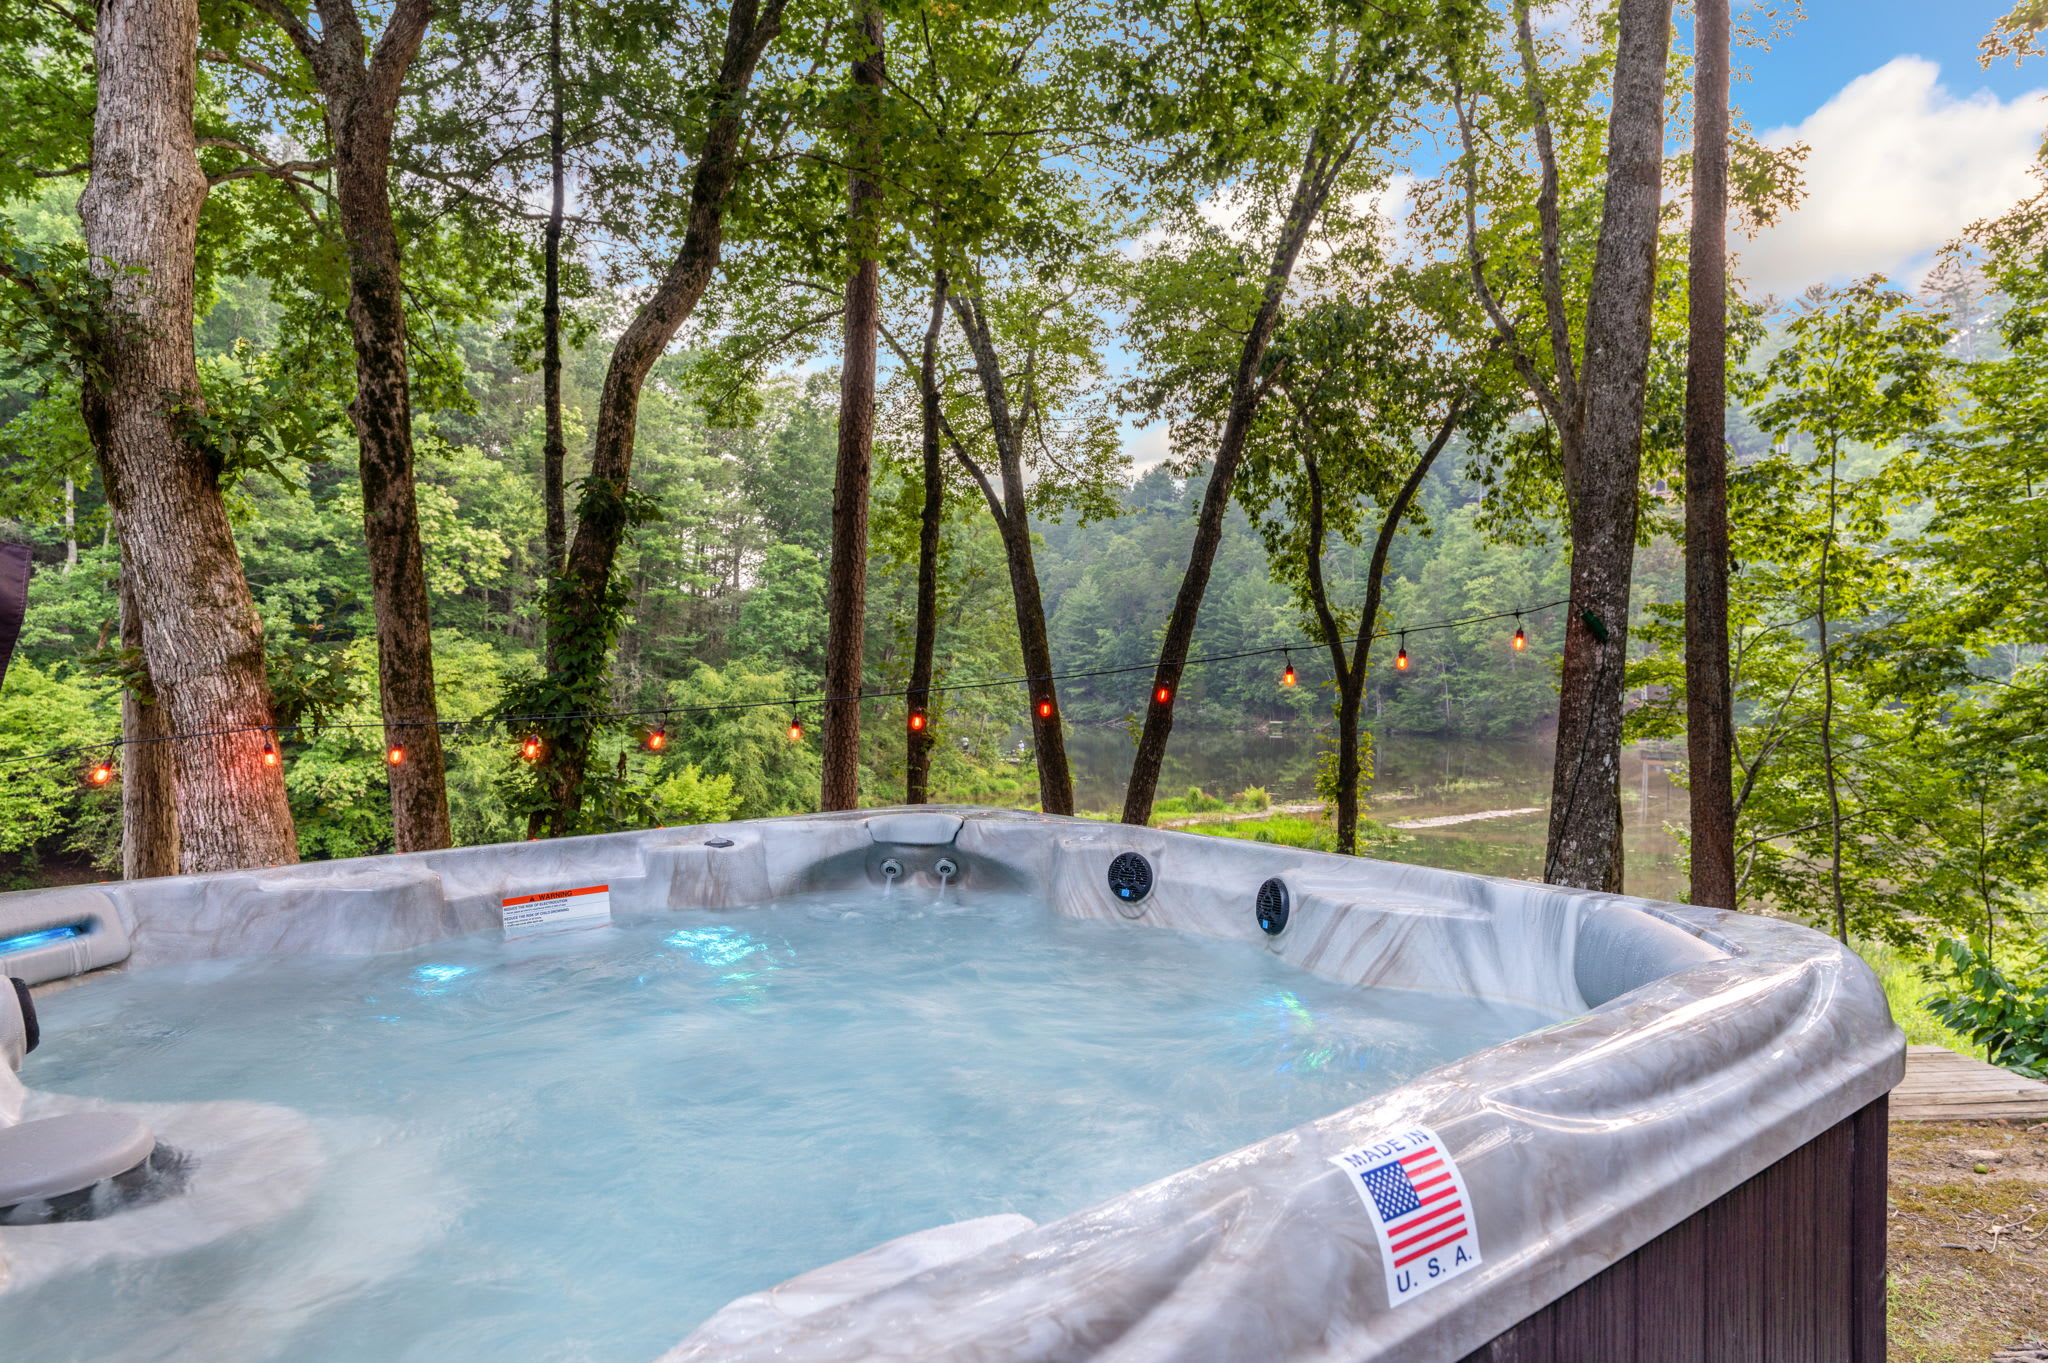 Sit back and relax in our 7 person hot tub- fully equipped with LED lights and bluetooth speakers